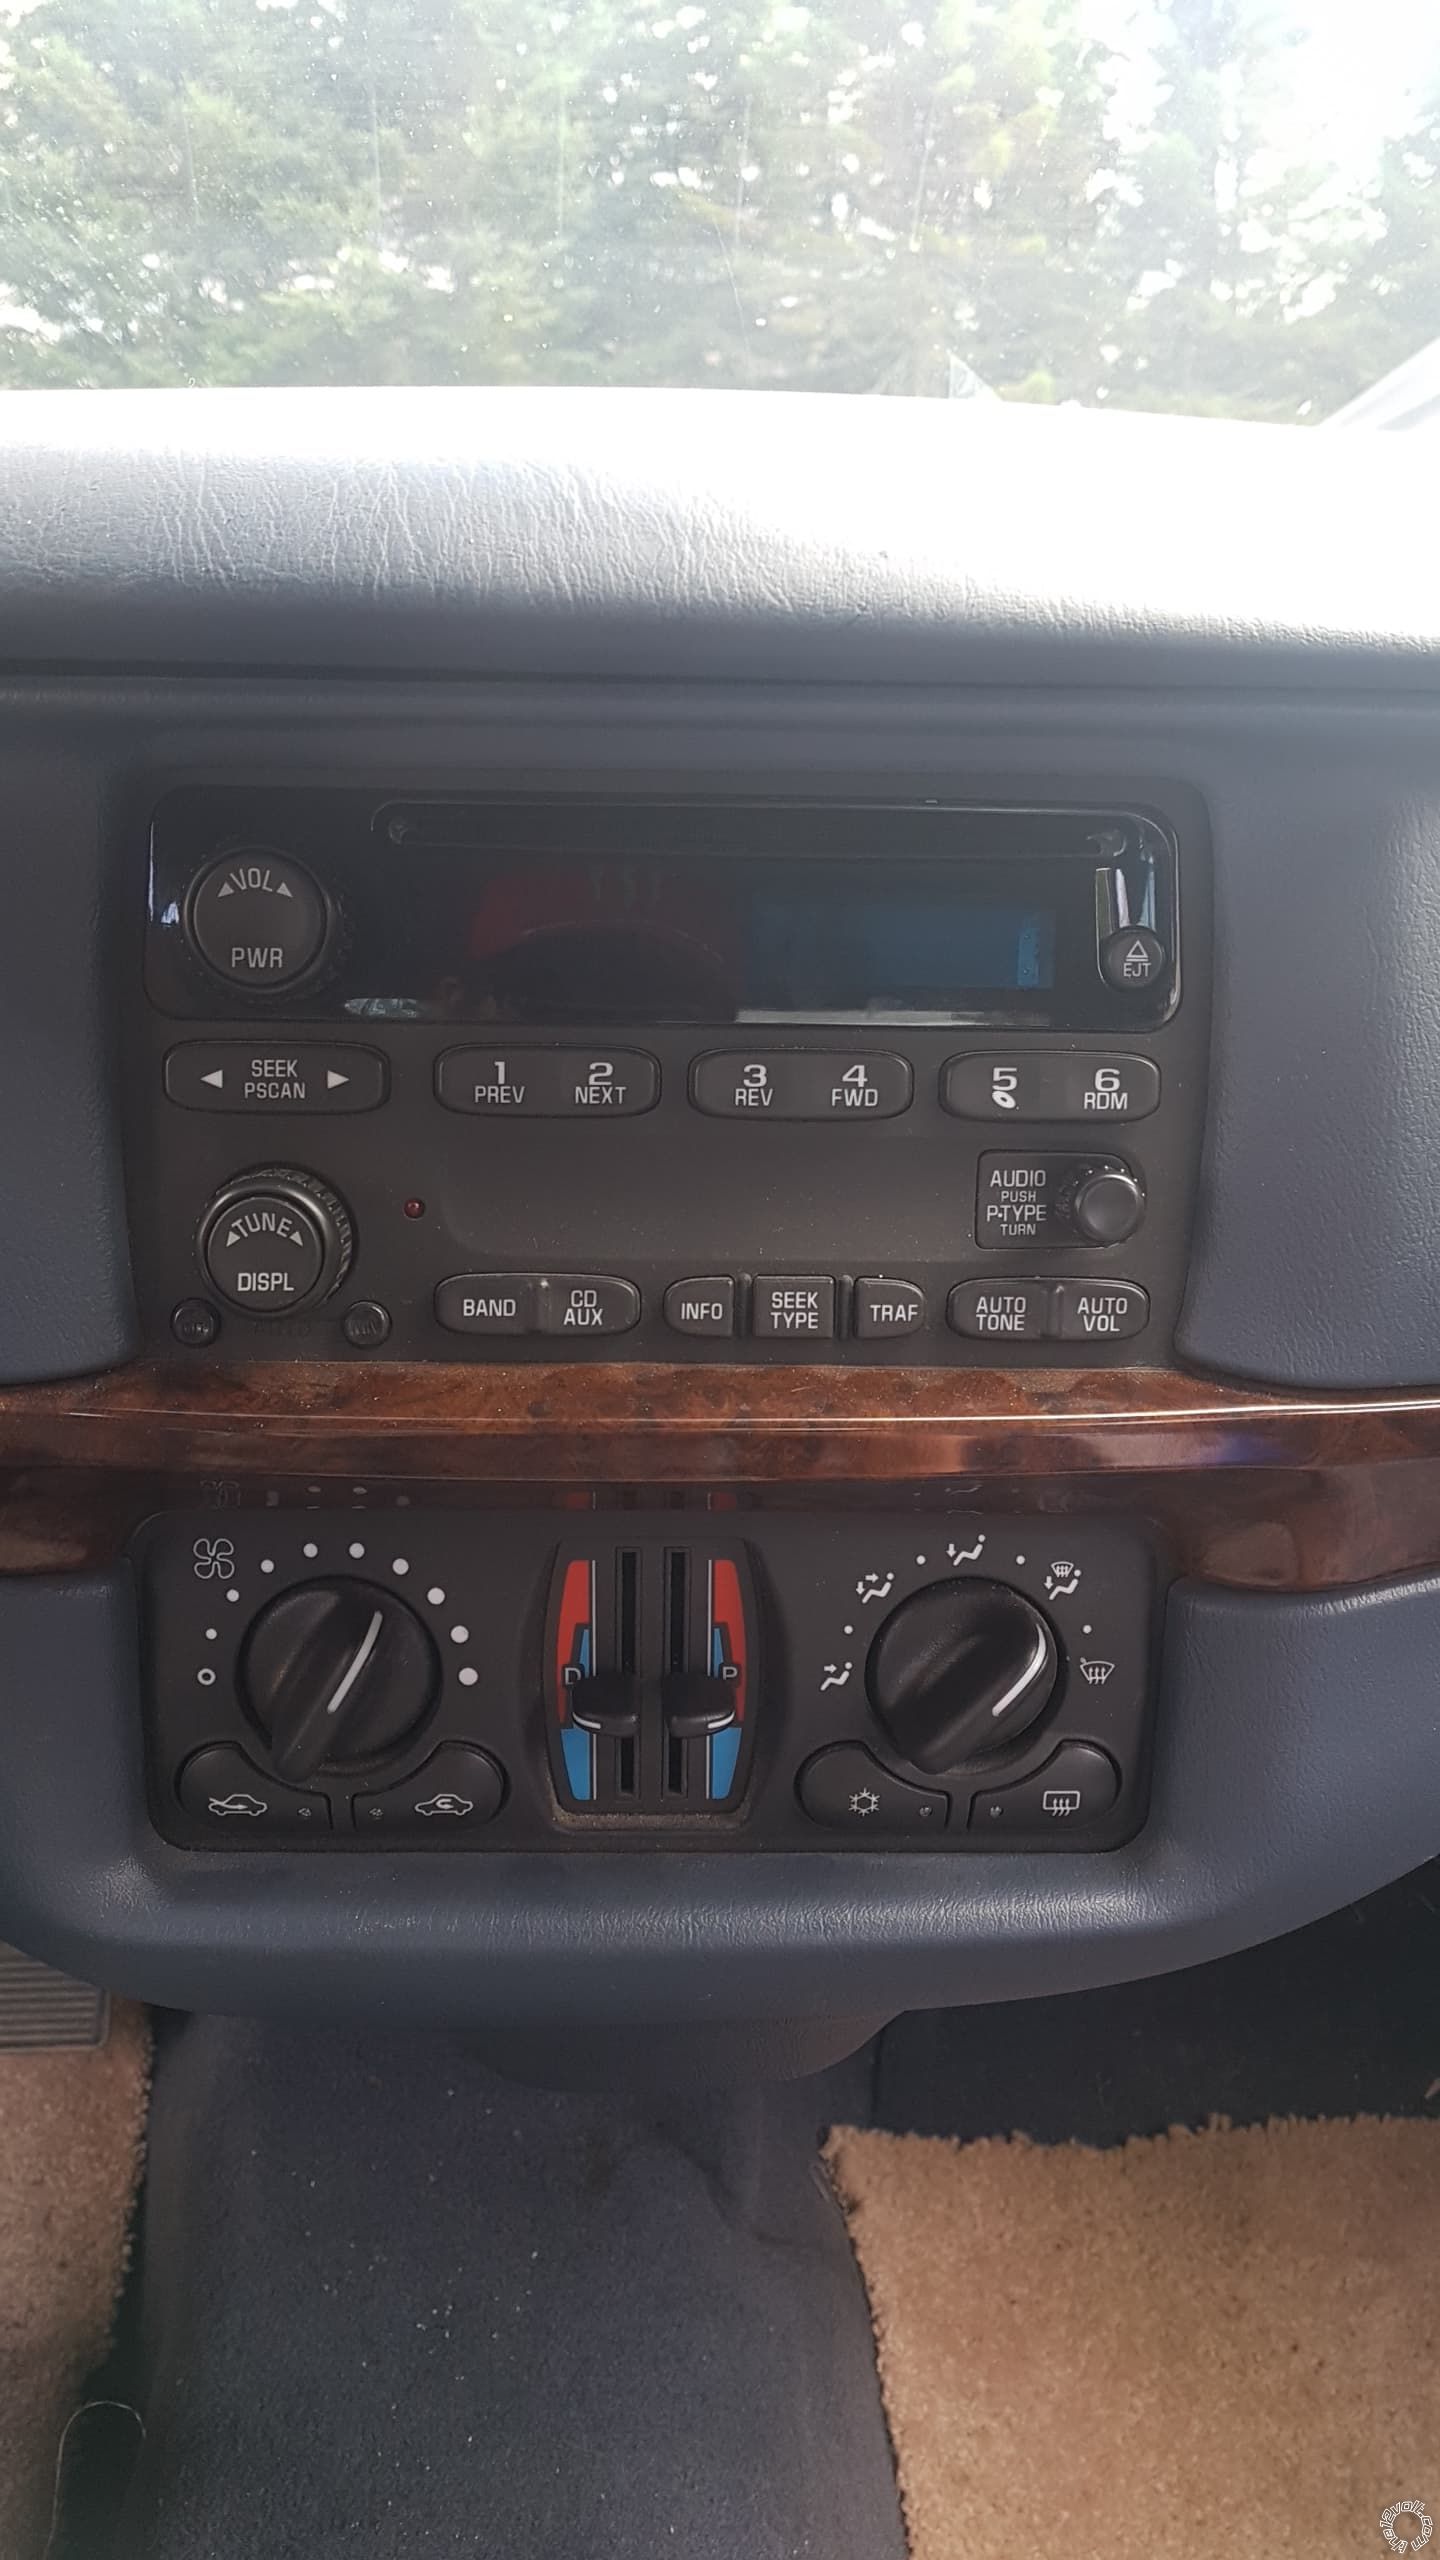 Which Wiring Kit for Head Unit, 2004 Chevrolet Impala - Last Post -- posted image.